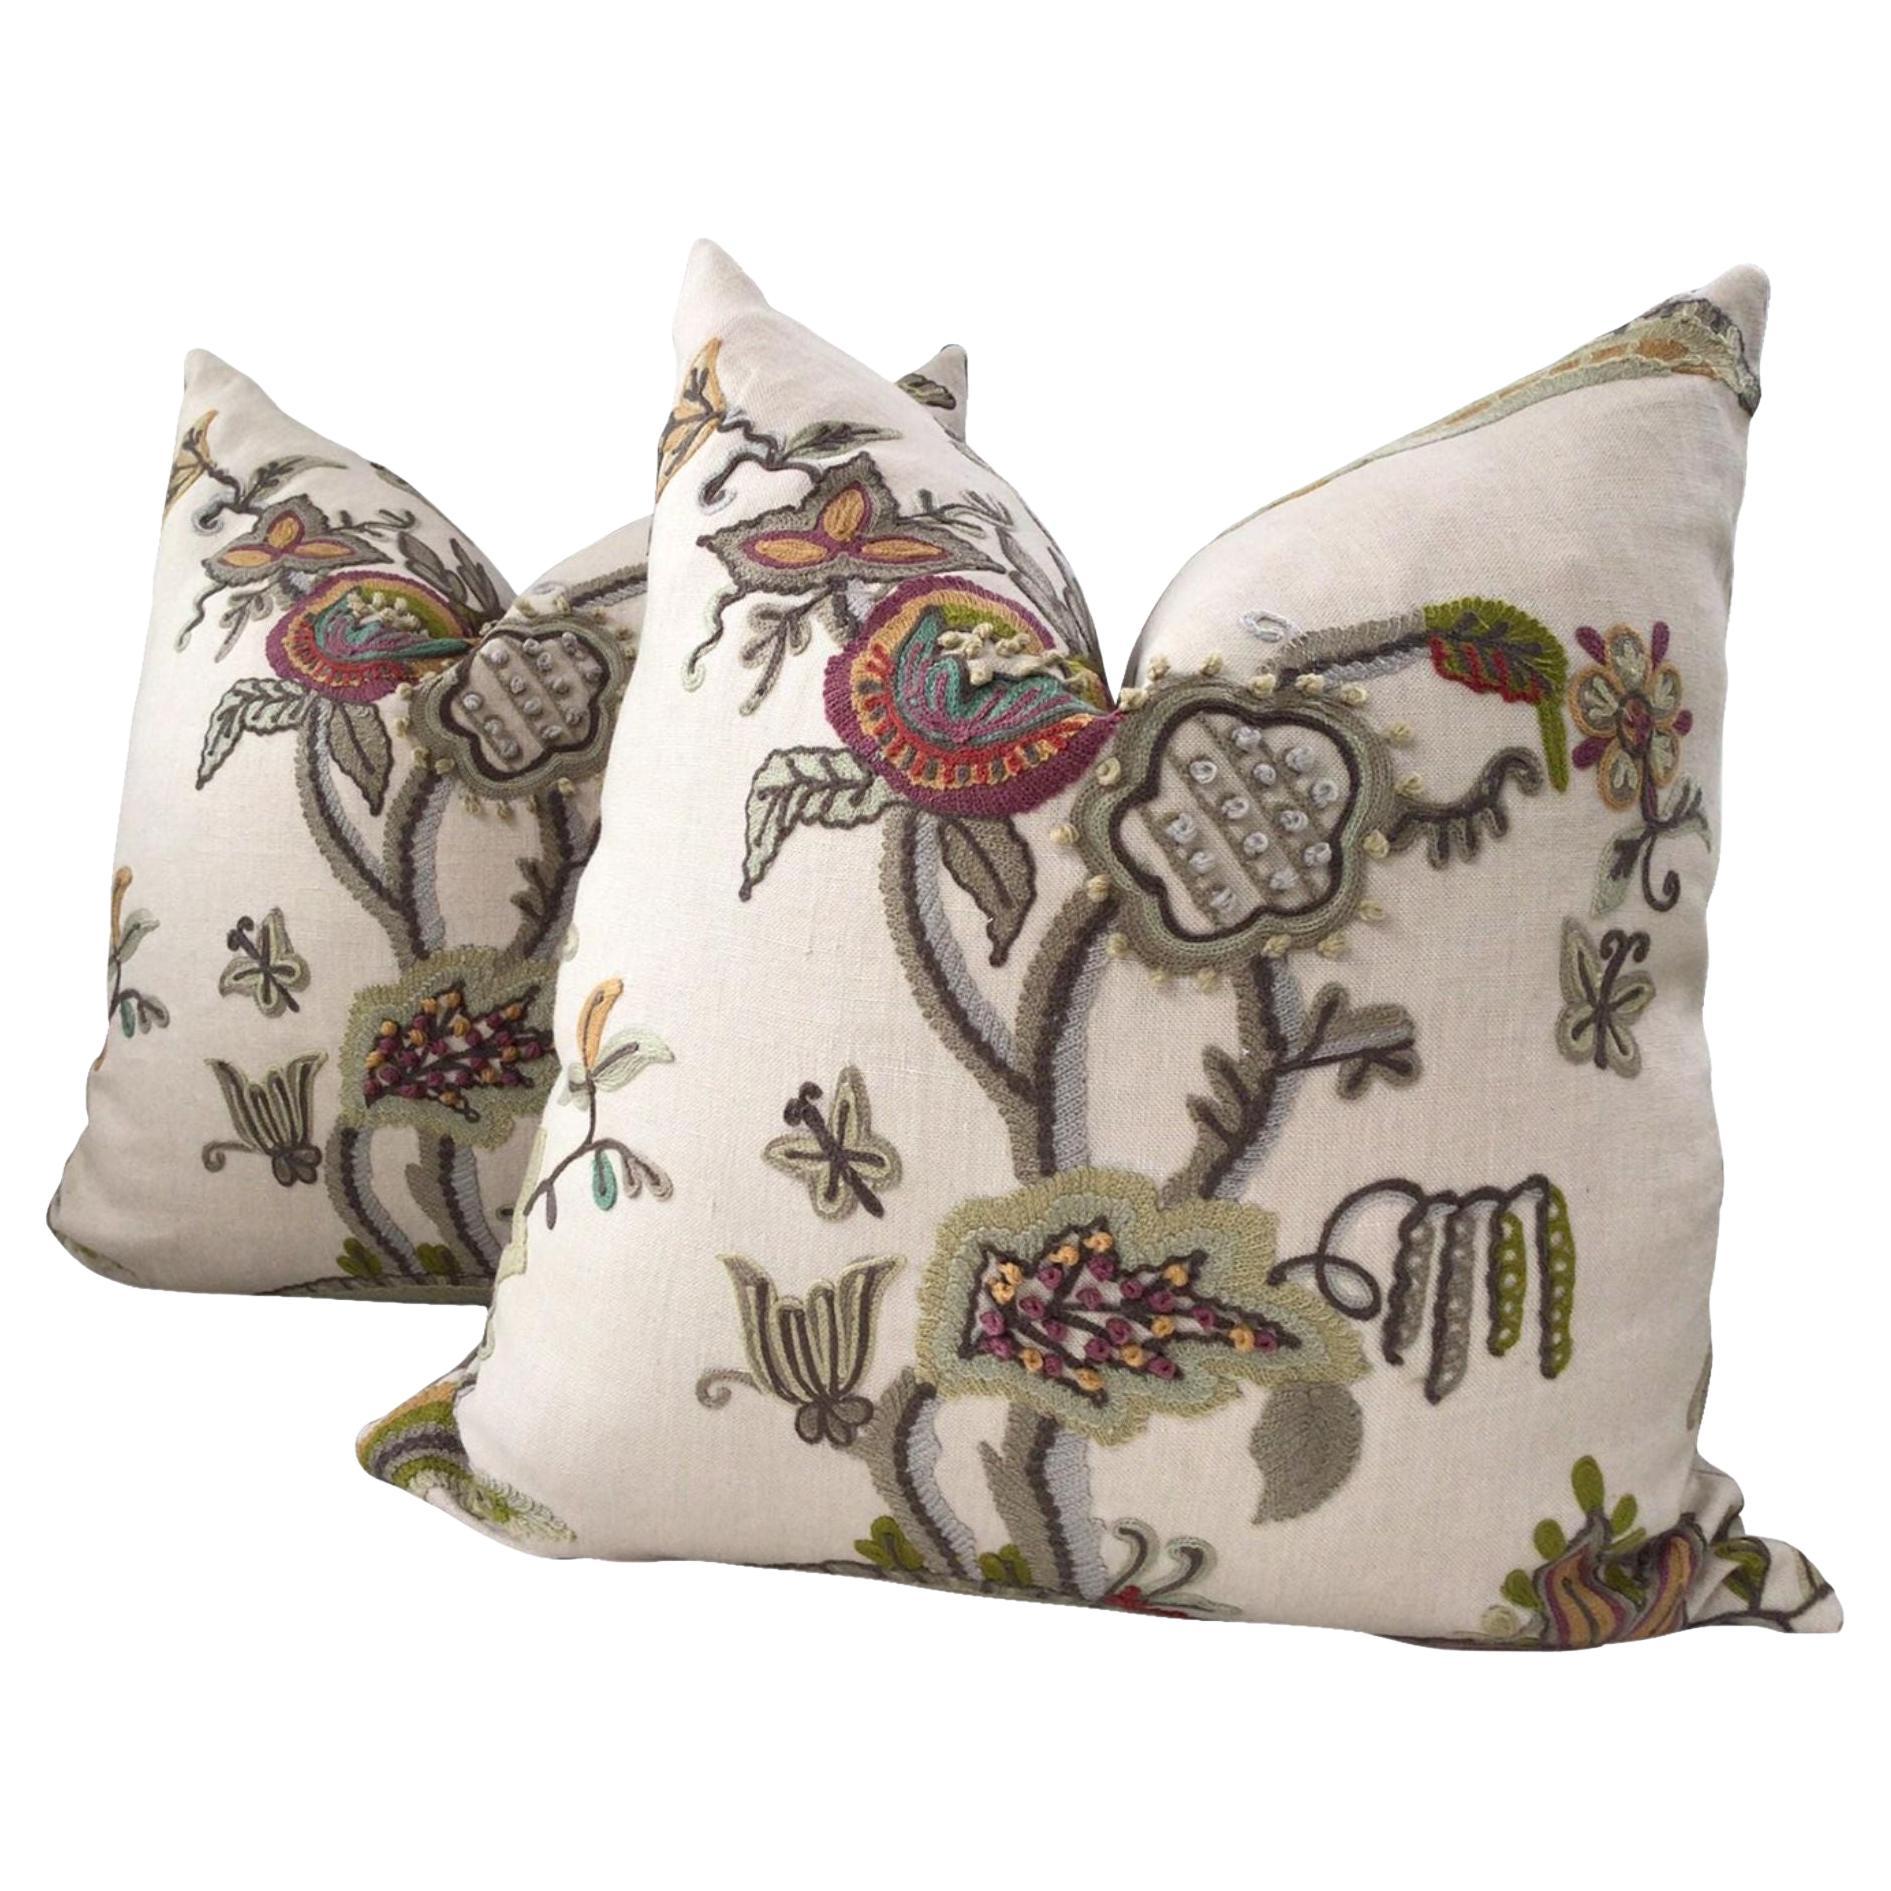 Lee Jofa "Cambria Crewel" in Plum and Moss Pillows - a Pair For Sale